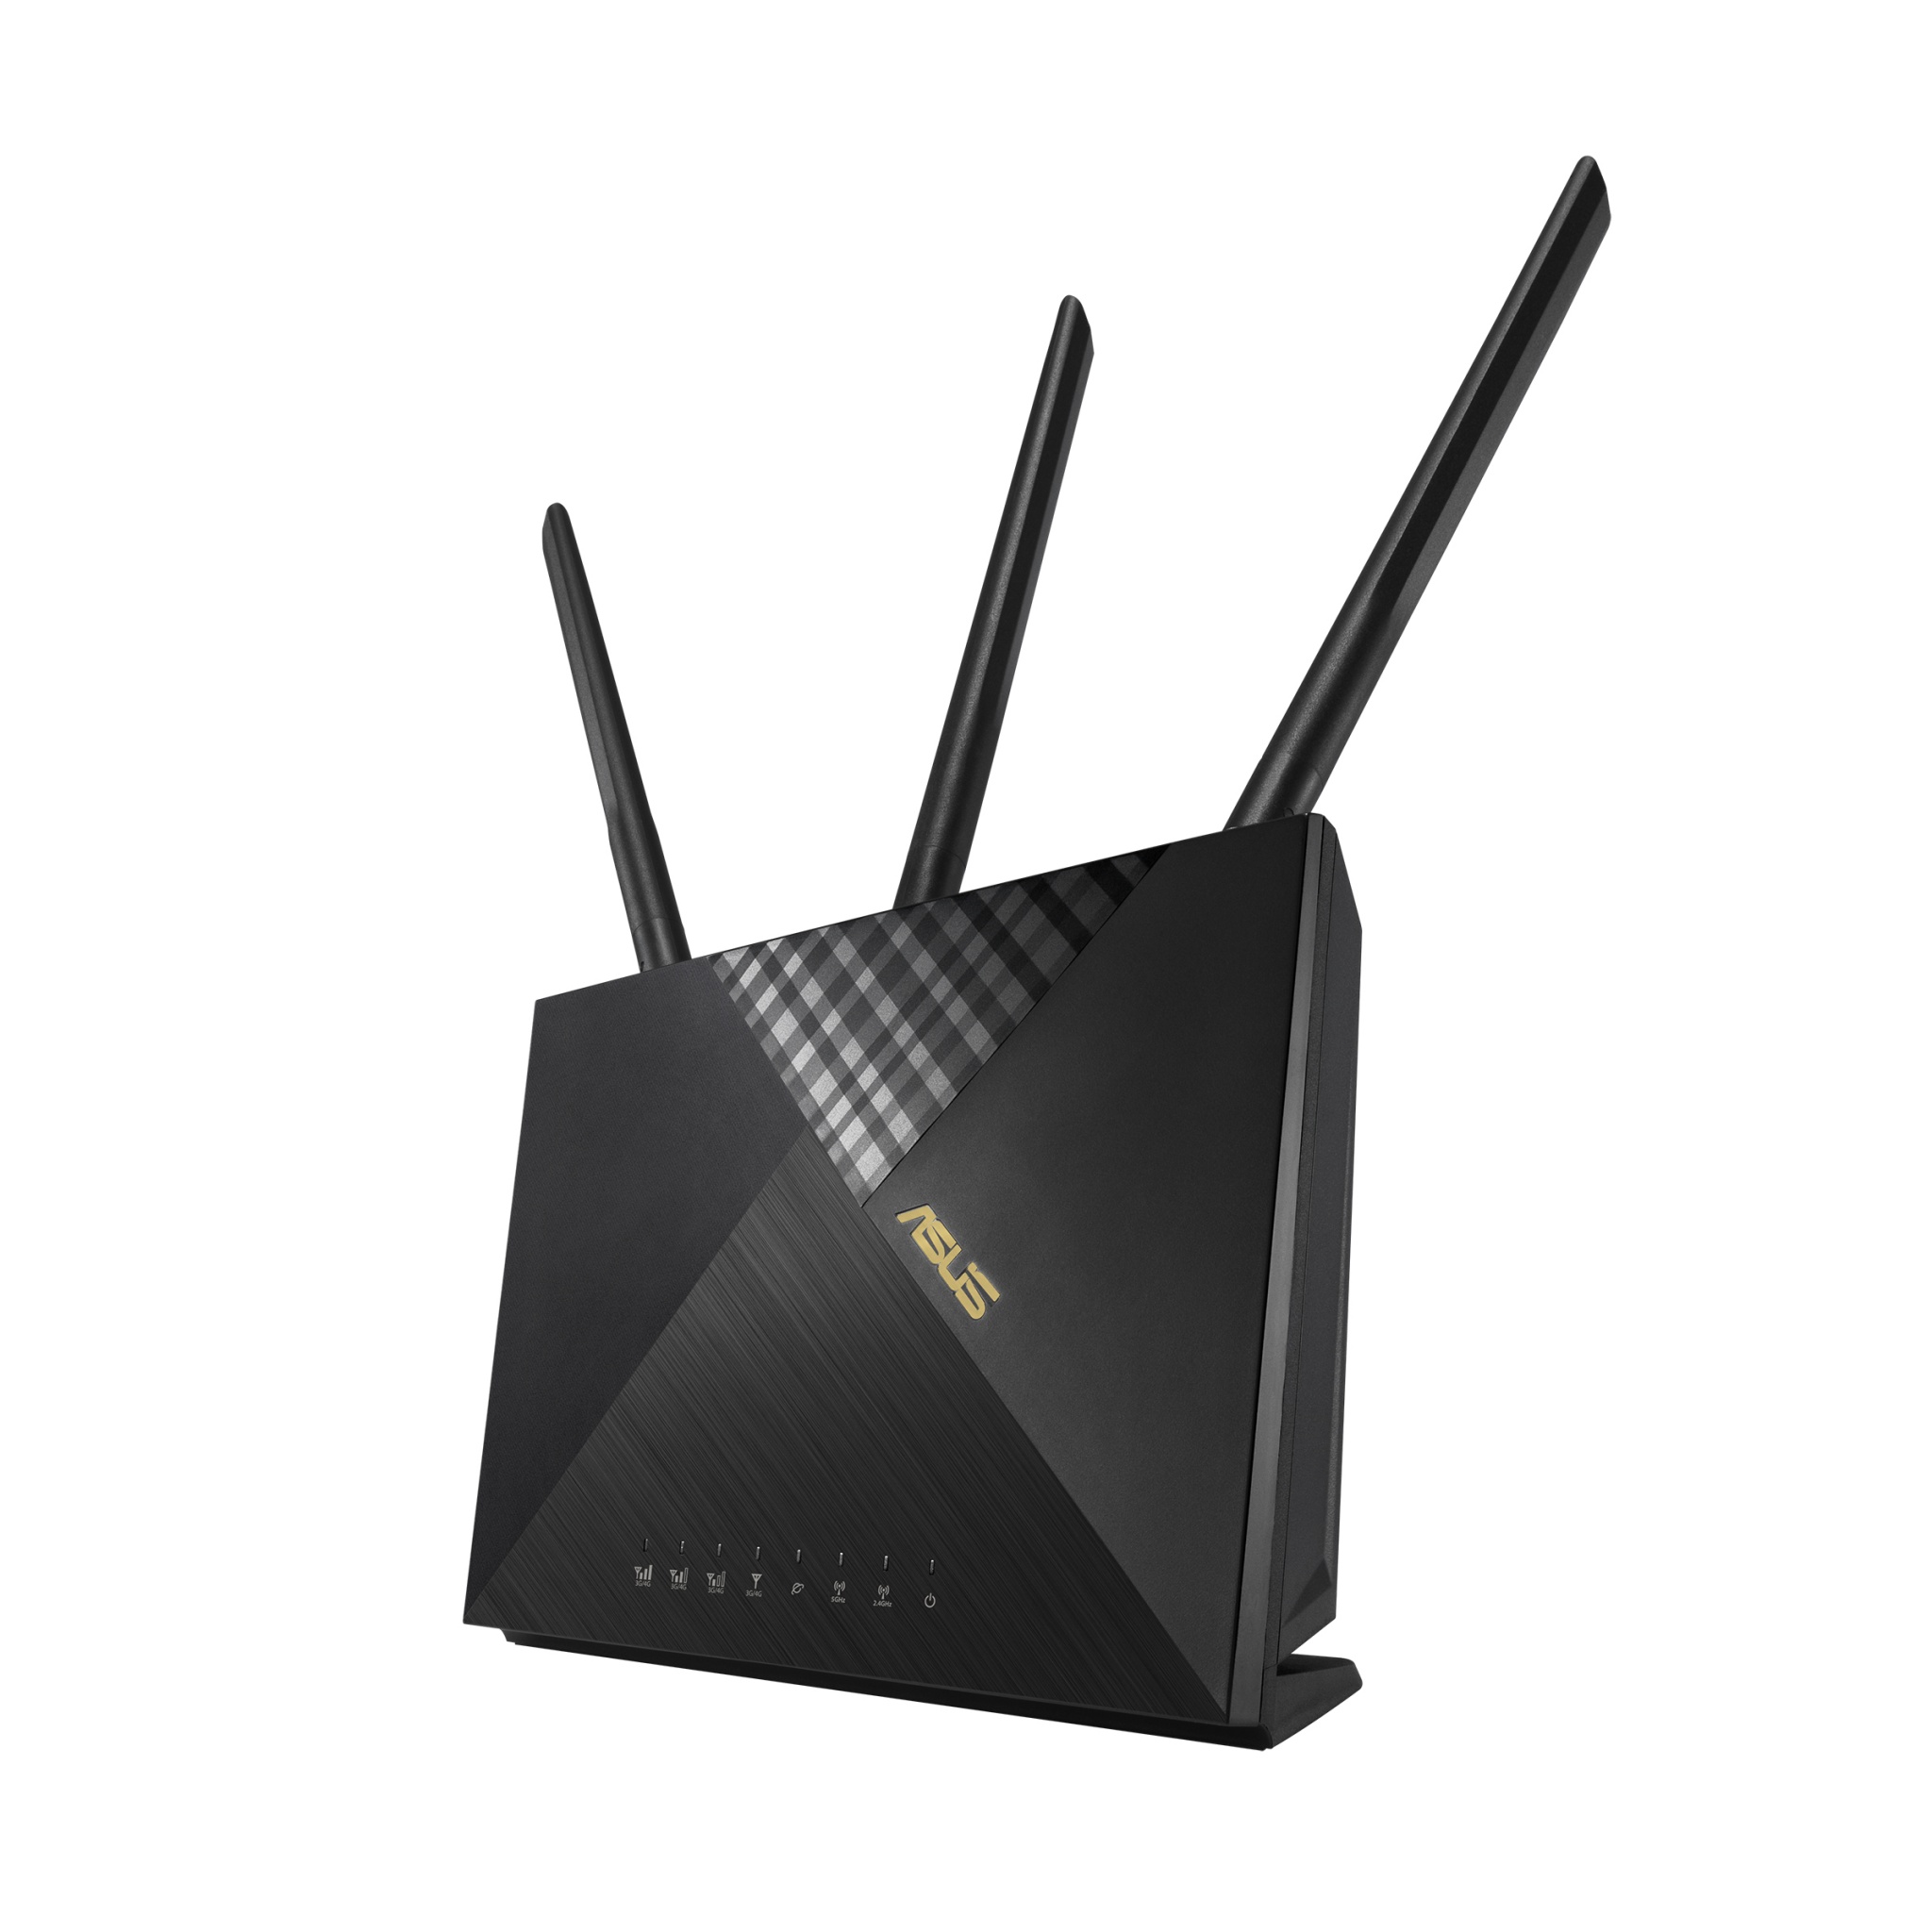 Black - Gigabit Ethernet Dual-band 4G-AX56 Wireless ASUS Router